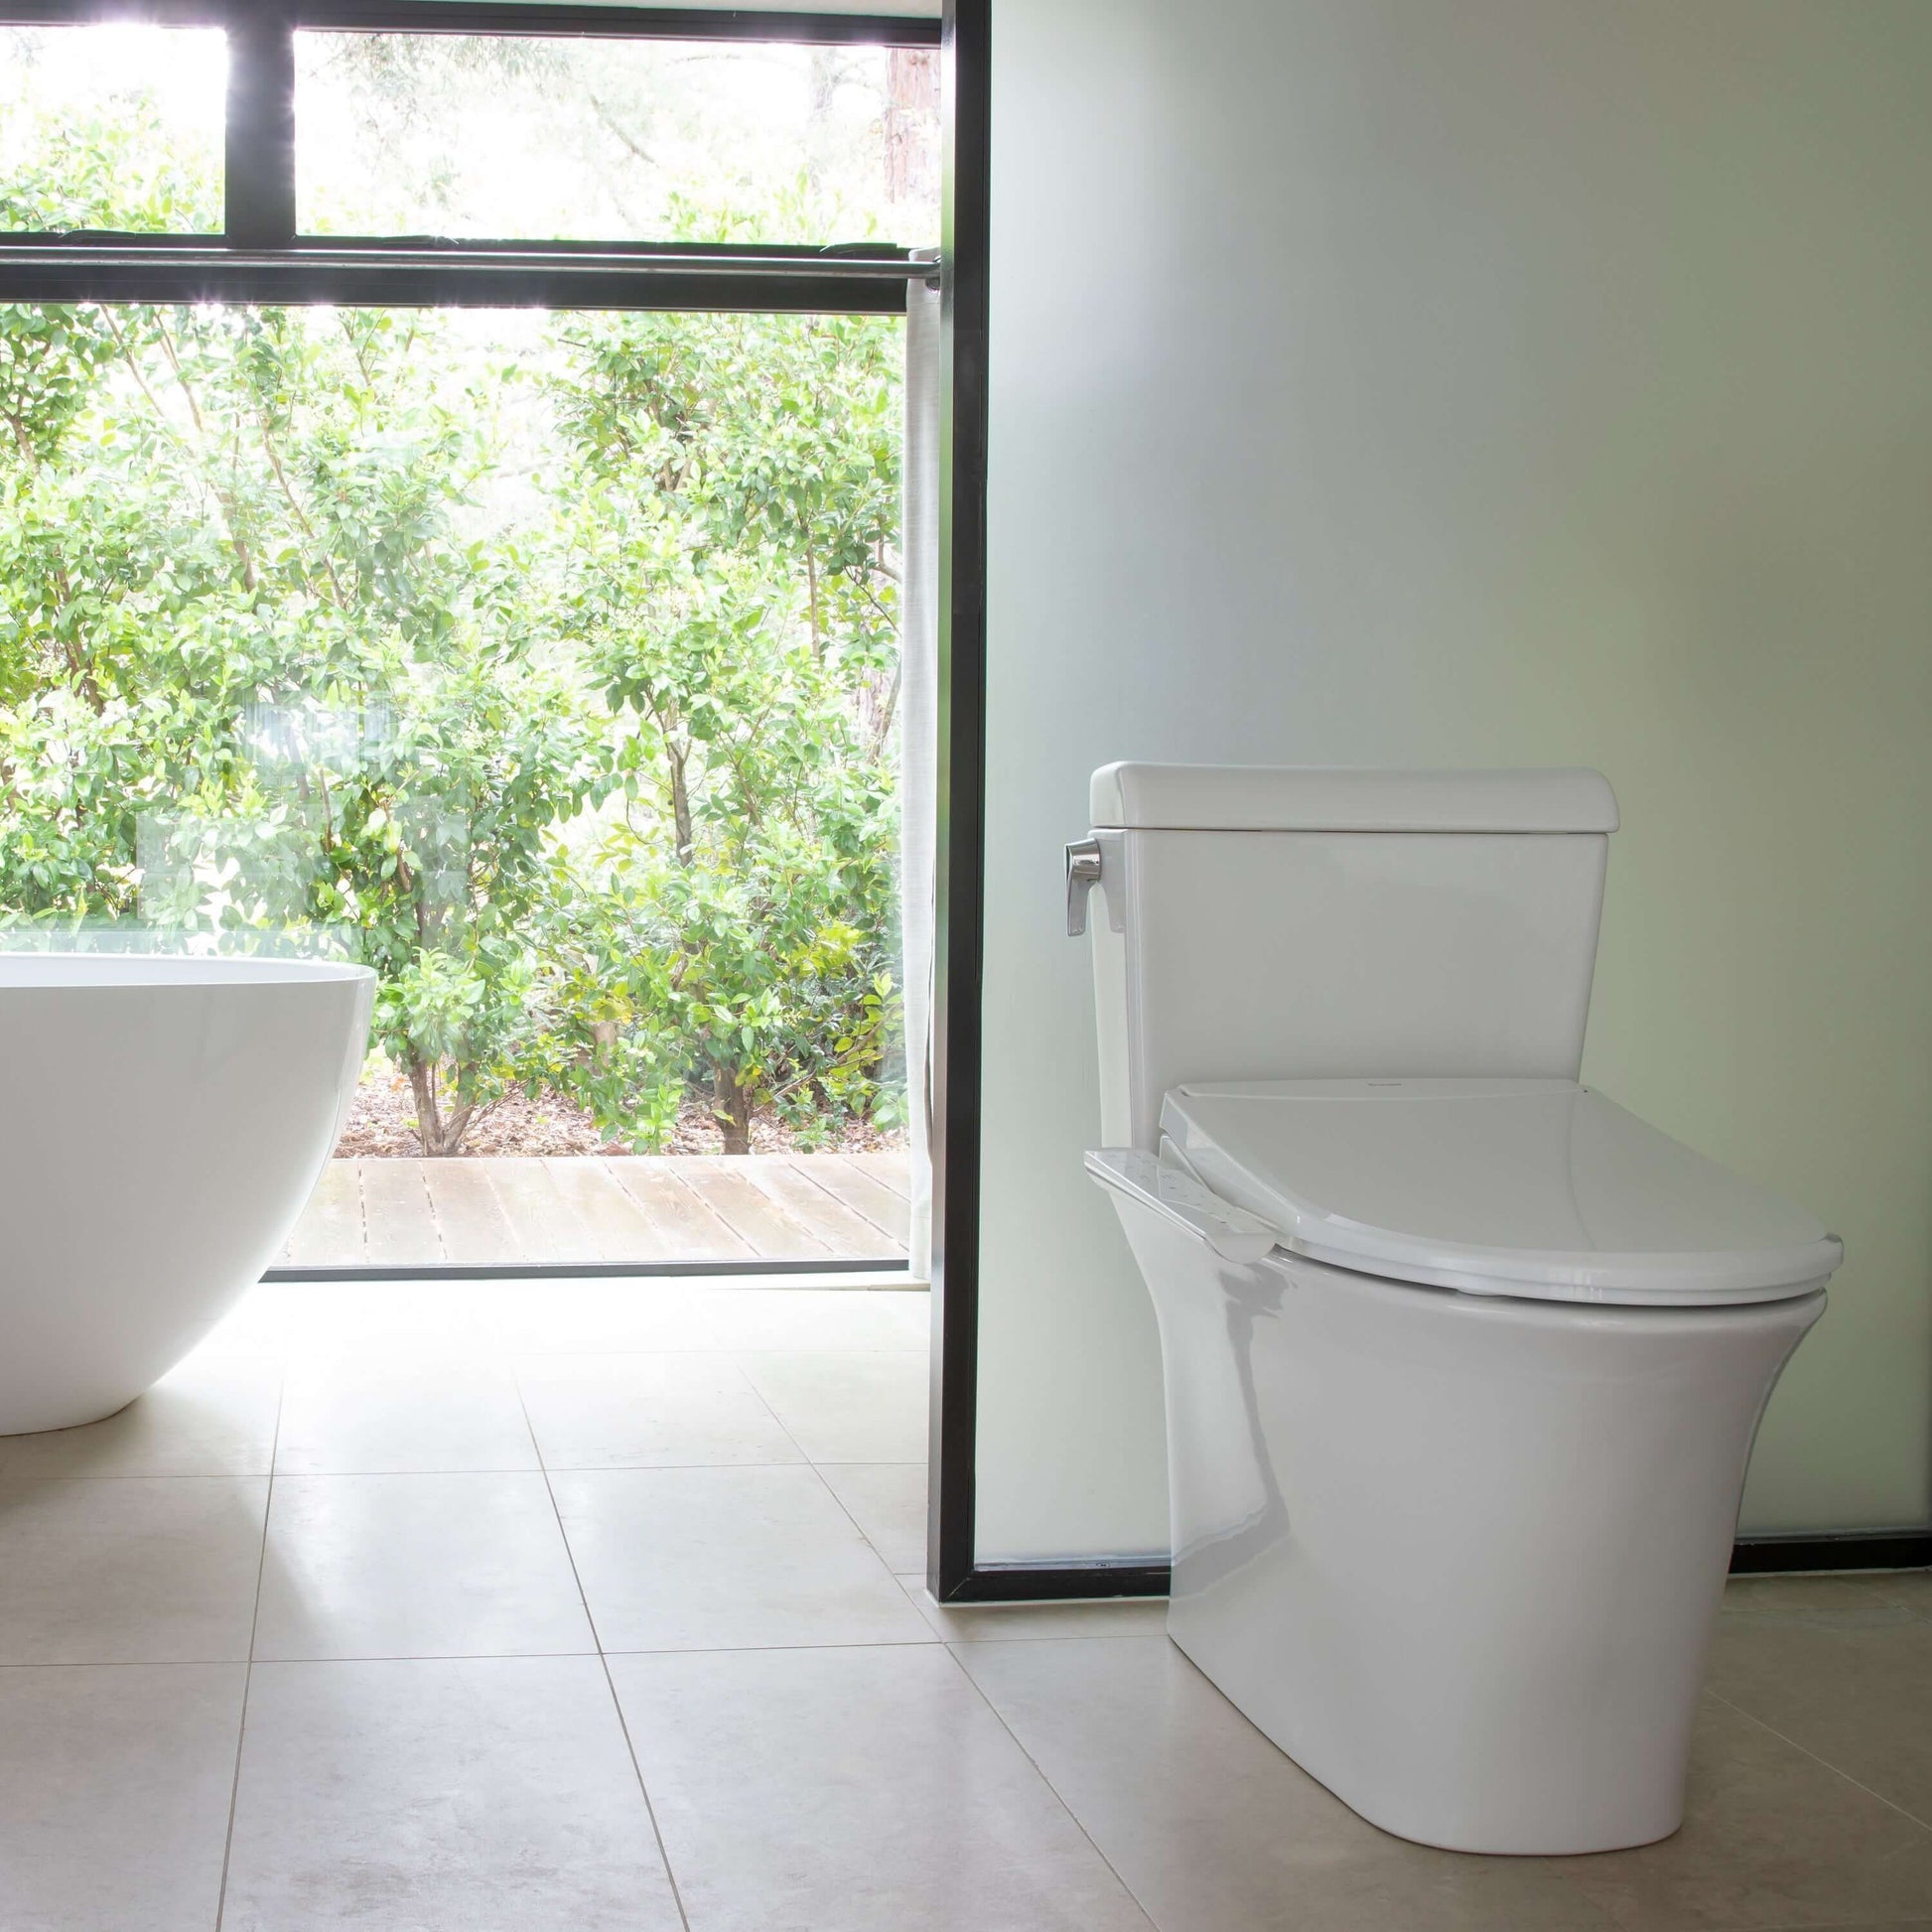 Swash Thinline T22 Bidet Seat - front view attached to a toilet in a bathroom